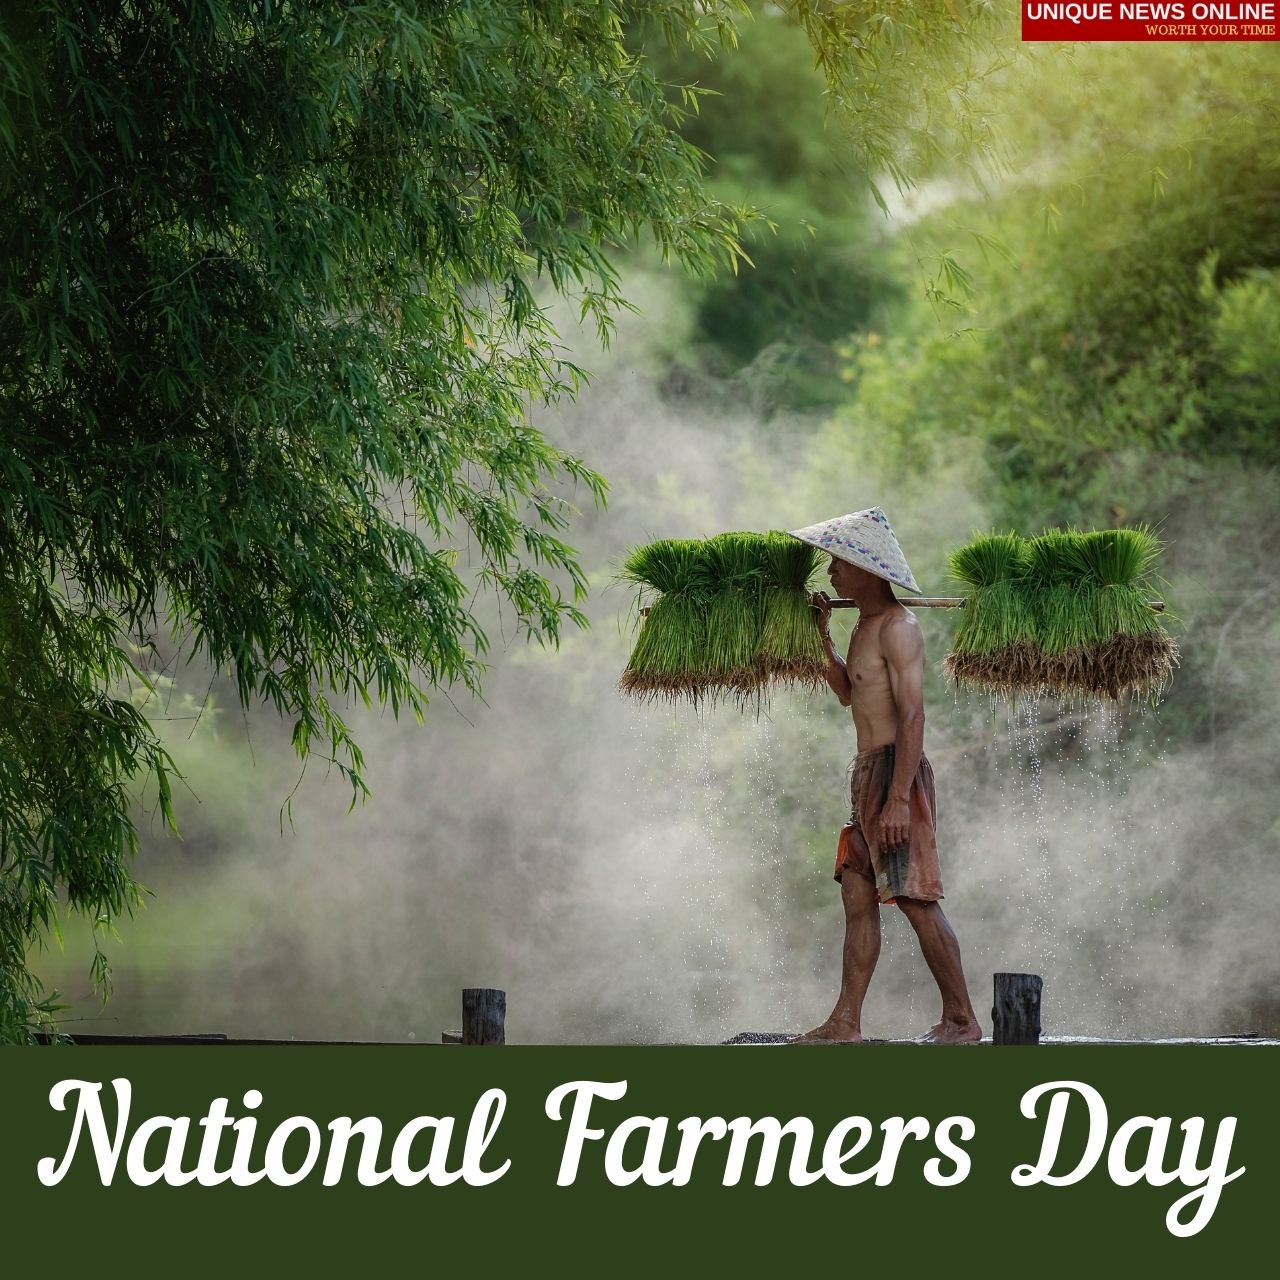 National Farmers Day 2021 Instagram Captions, Stickers, Greetings, Sayings, and Slogan to Share,